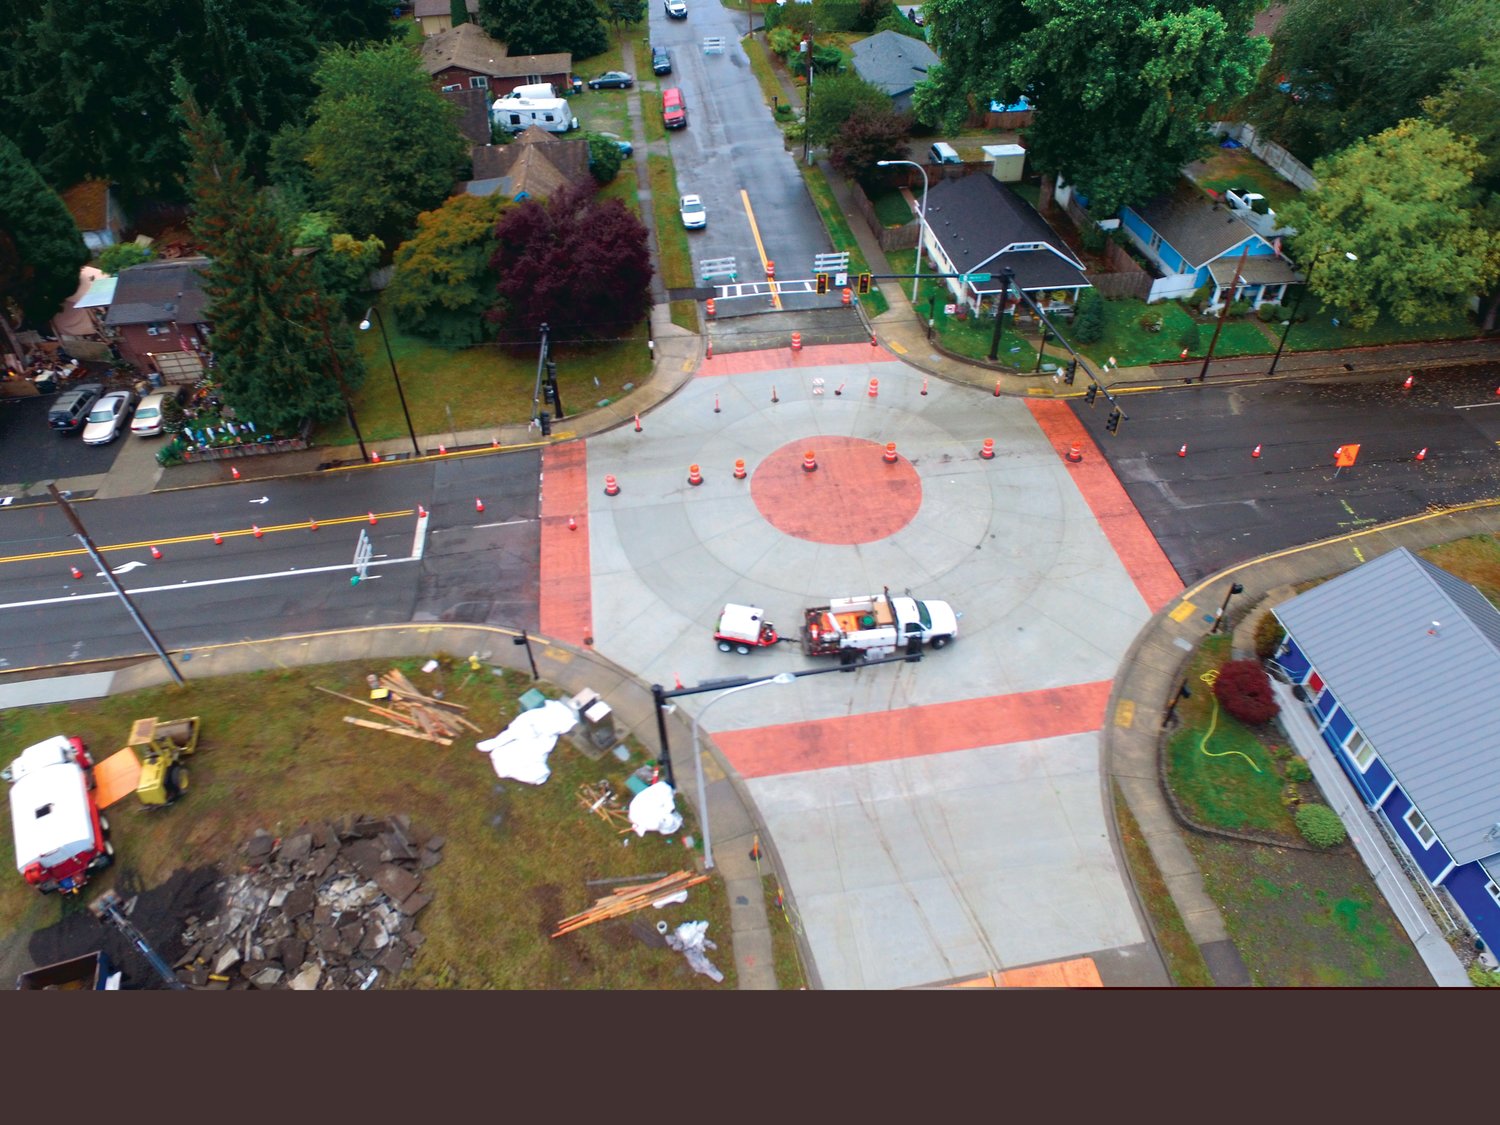 The intersection of Yew and Mellen streets is pictured under construction in this photograph taken with a drone by the City of Centralia.